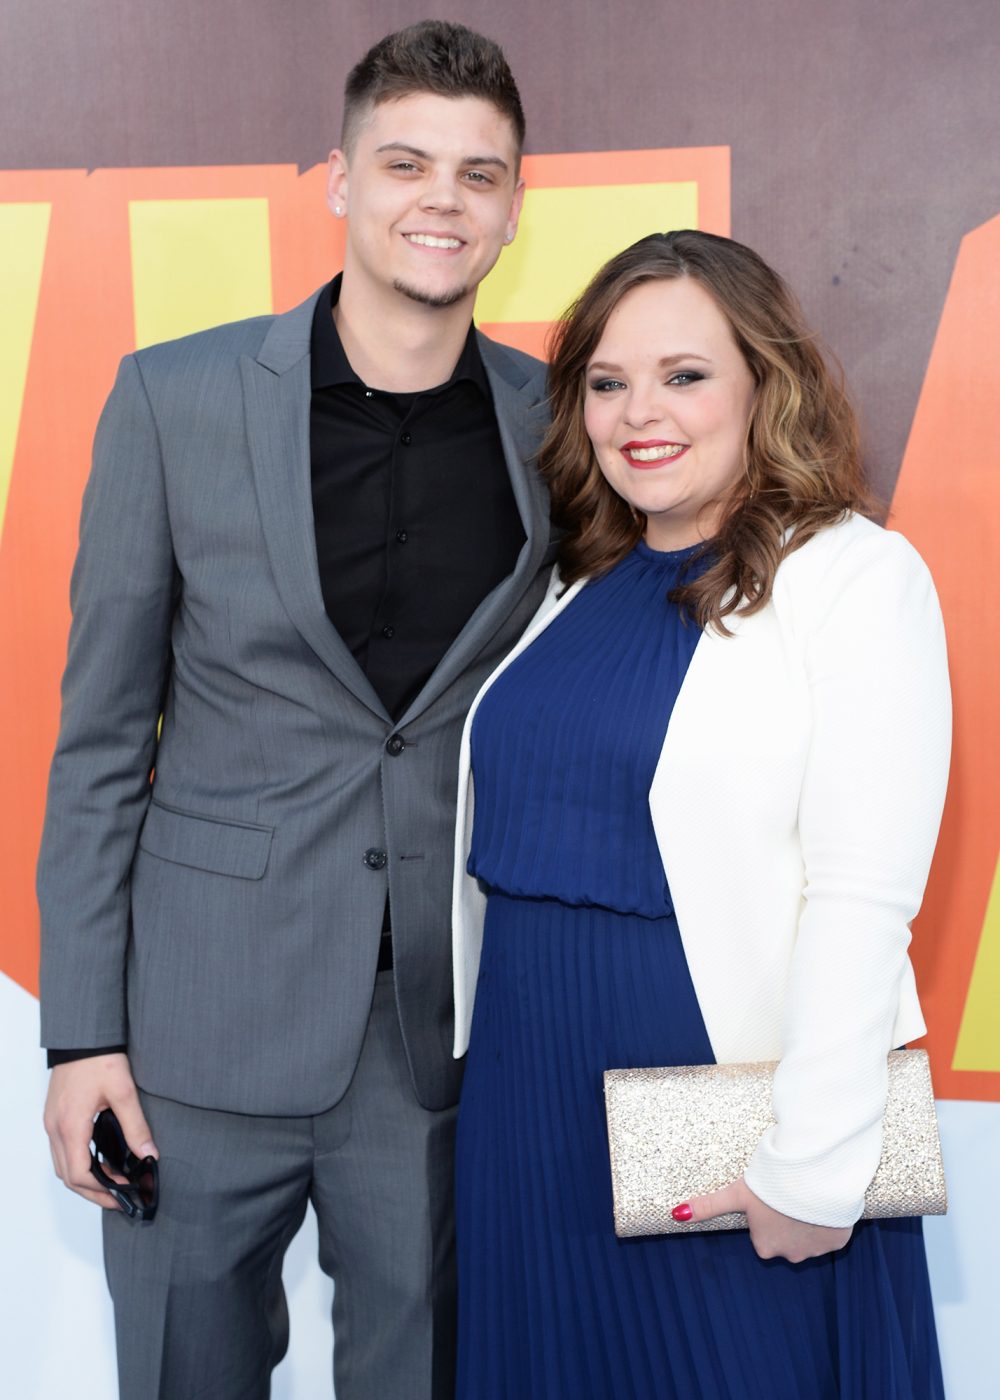 ‘Teen Mom OG’ Star Tyler Baltierra and Pregnant Wife Catelynn Lowell Profess Their Love to Each Other